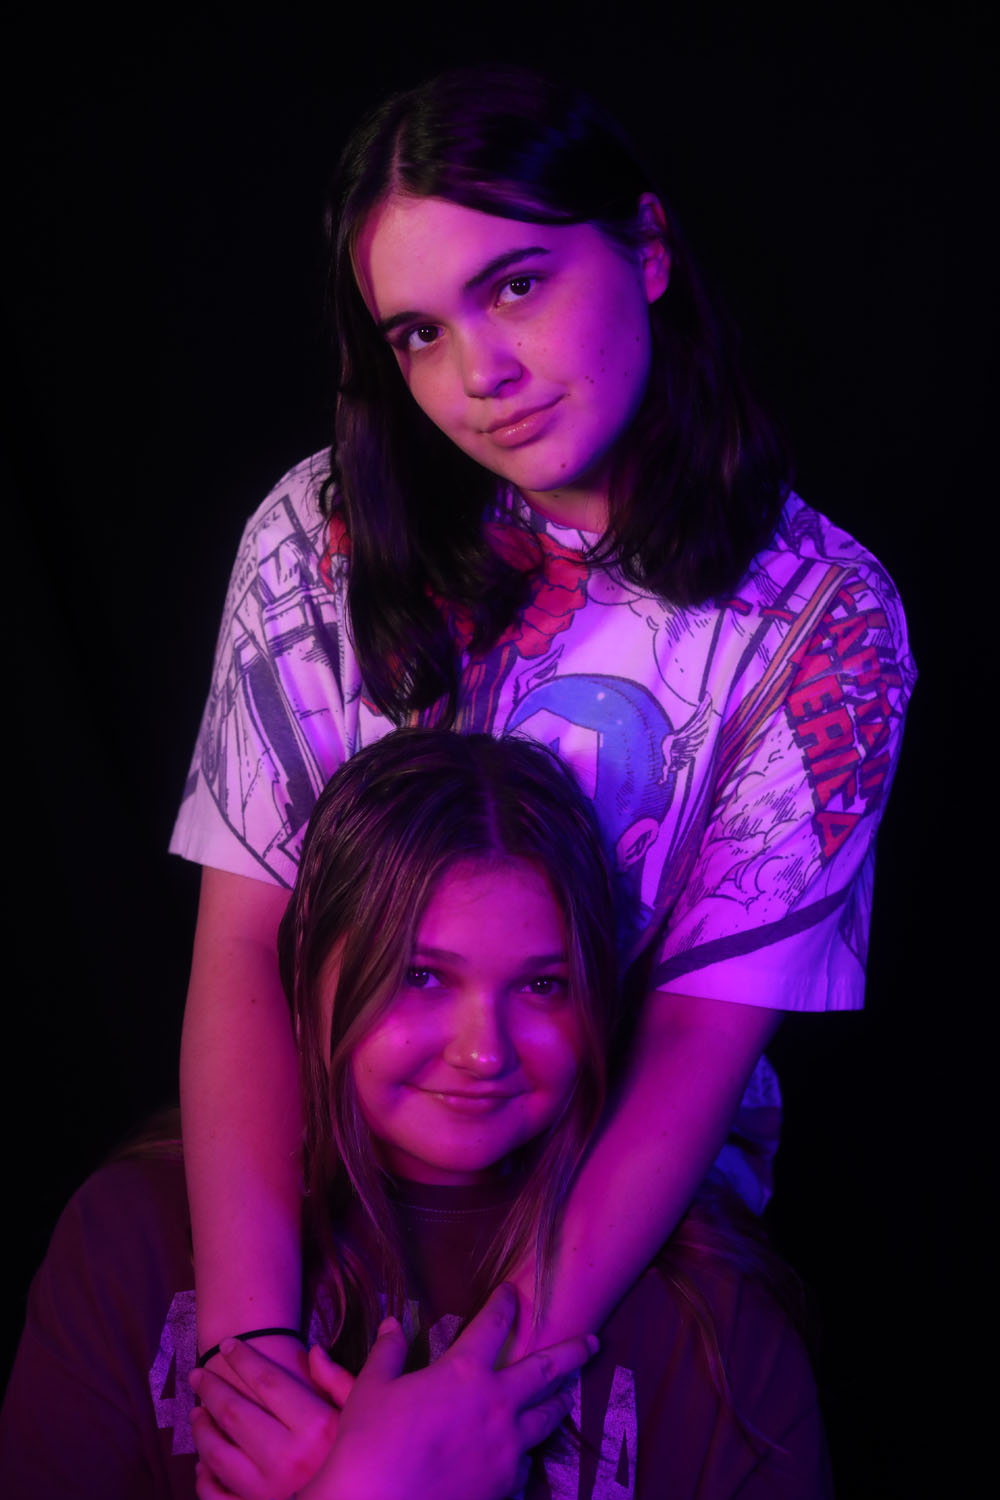 Two DRHS students using the studio lights